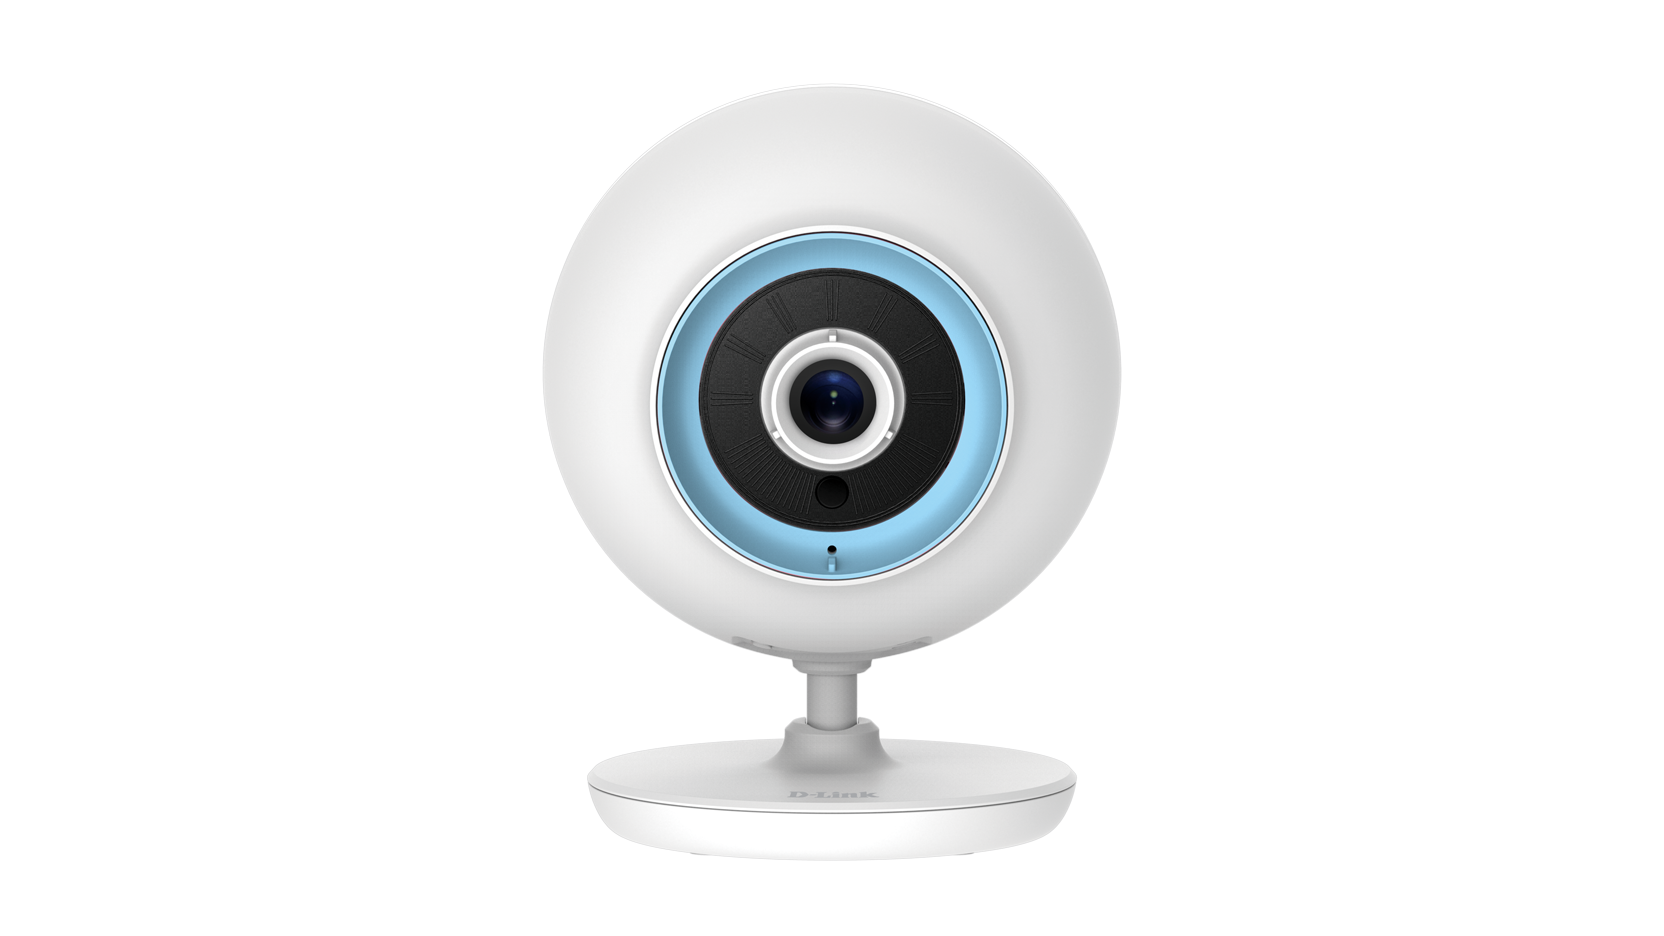 D-Link Wi-Fi Baby Camera